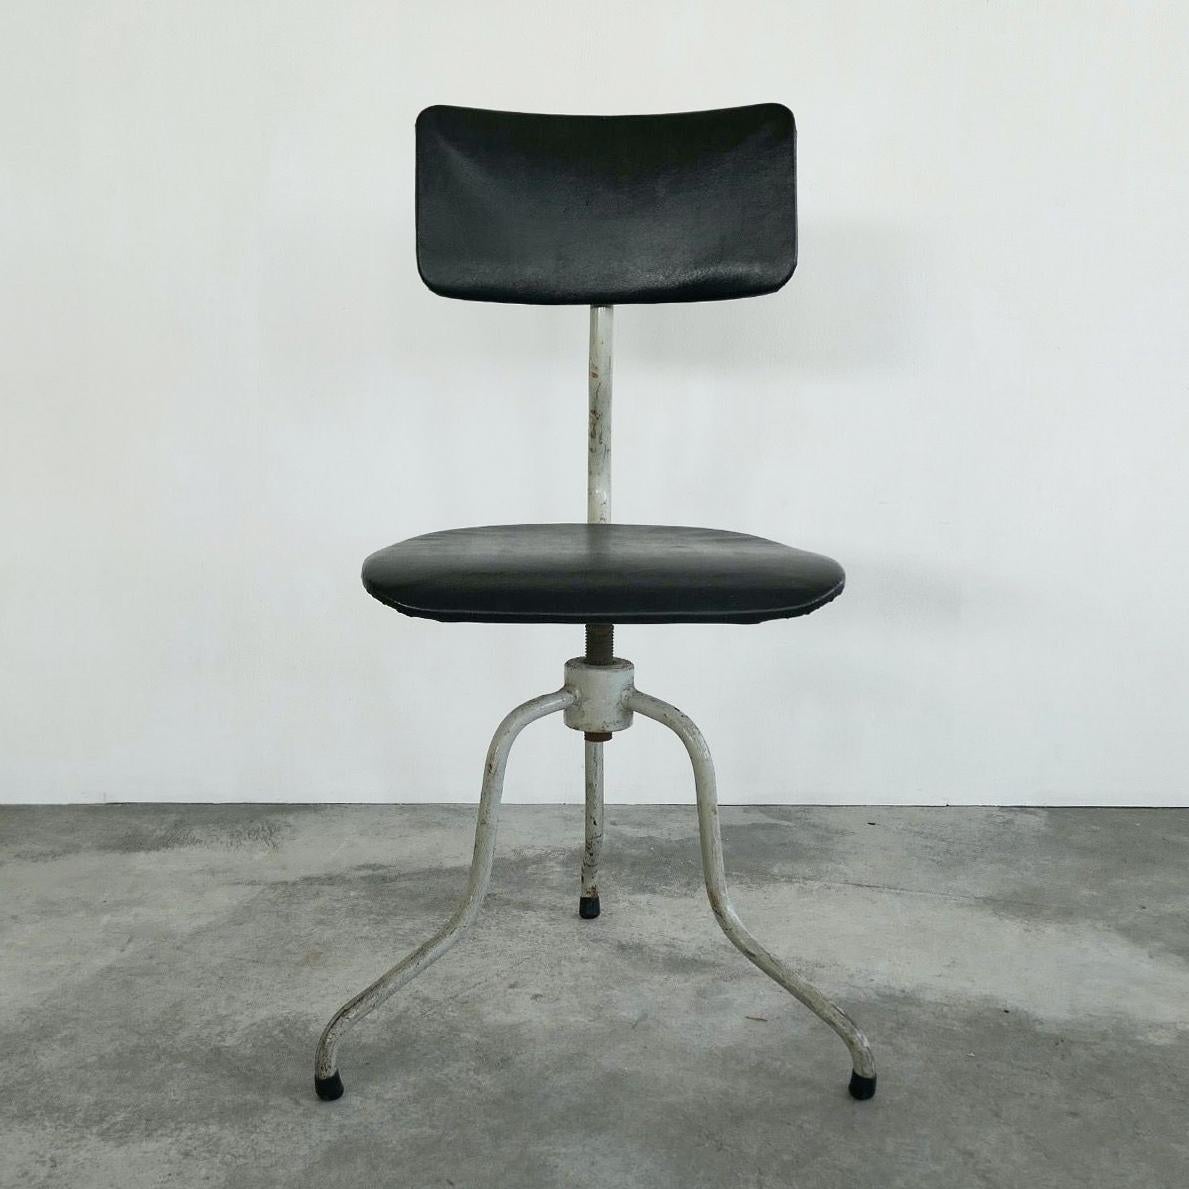 Sculptural Tripod Desk Chair 1930s.

Great industrial desk chair with a very distinct sculptural tripod base. It is kind of unusual to find a very modest and practical industrial chair with a very joyful base. The legs of this chair curl up in a